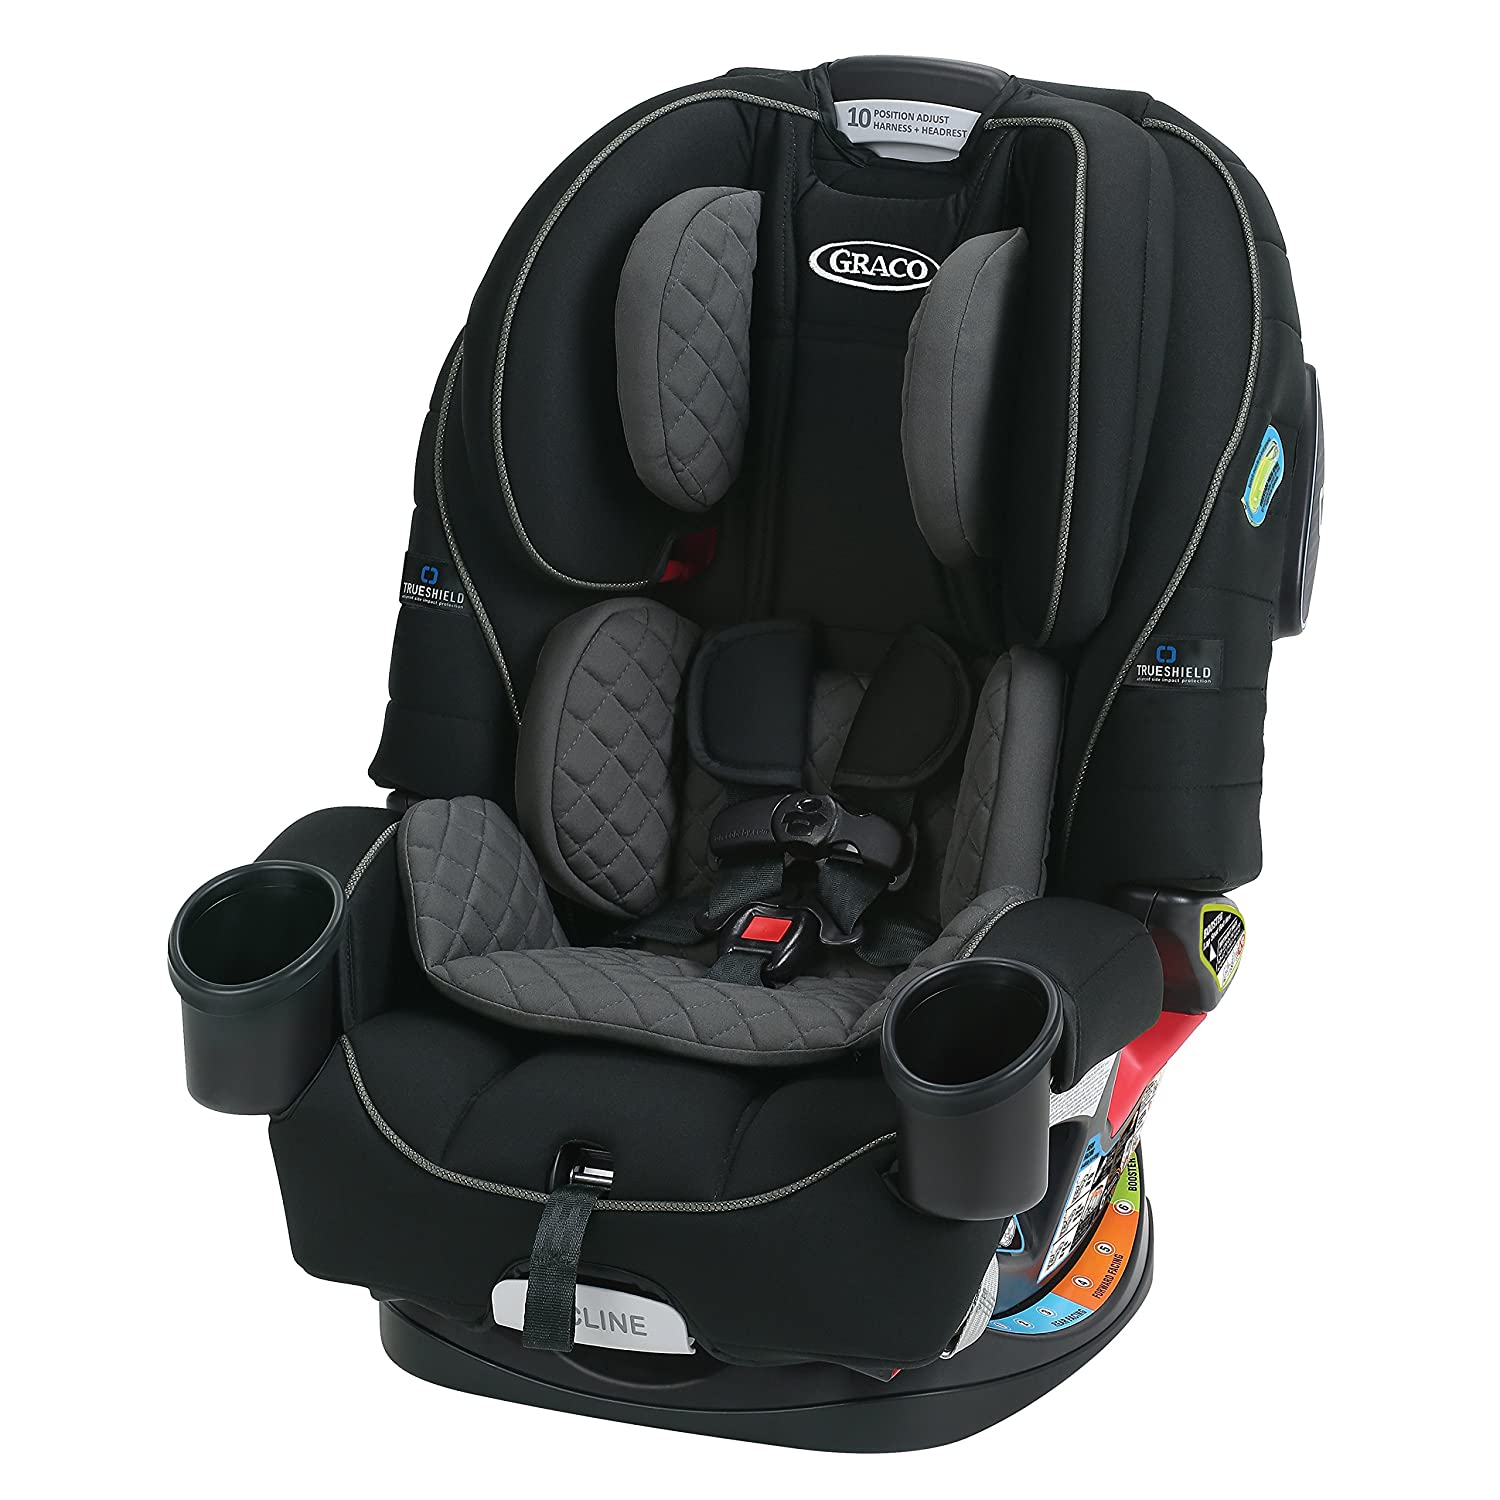 Best Car Seat For 2 Year Old Toddlers [2021 Safety Guide]